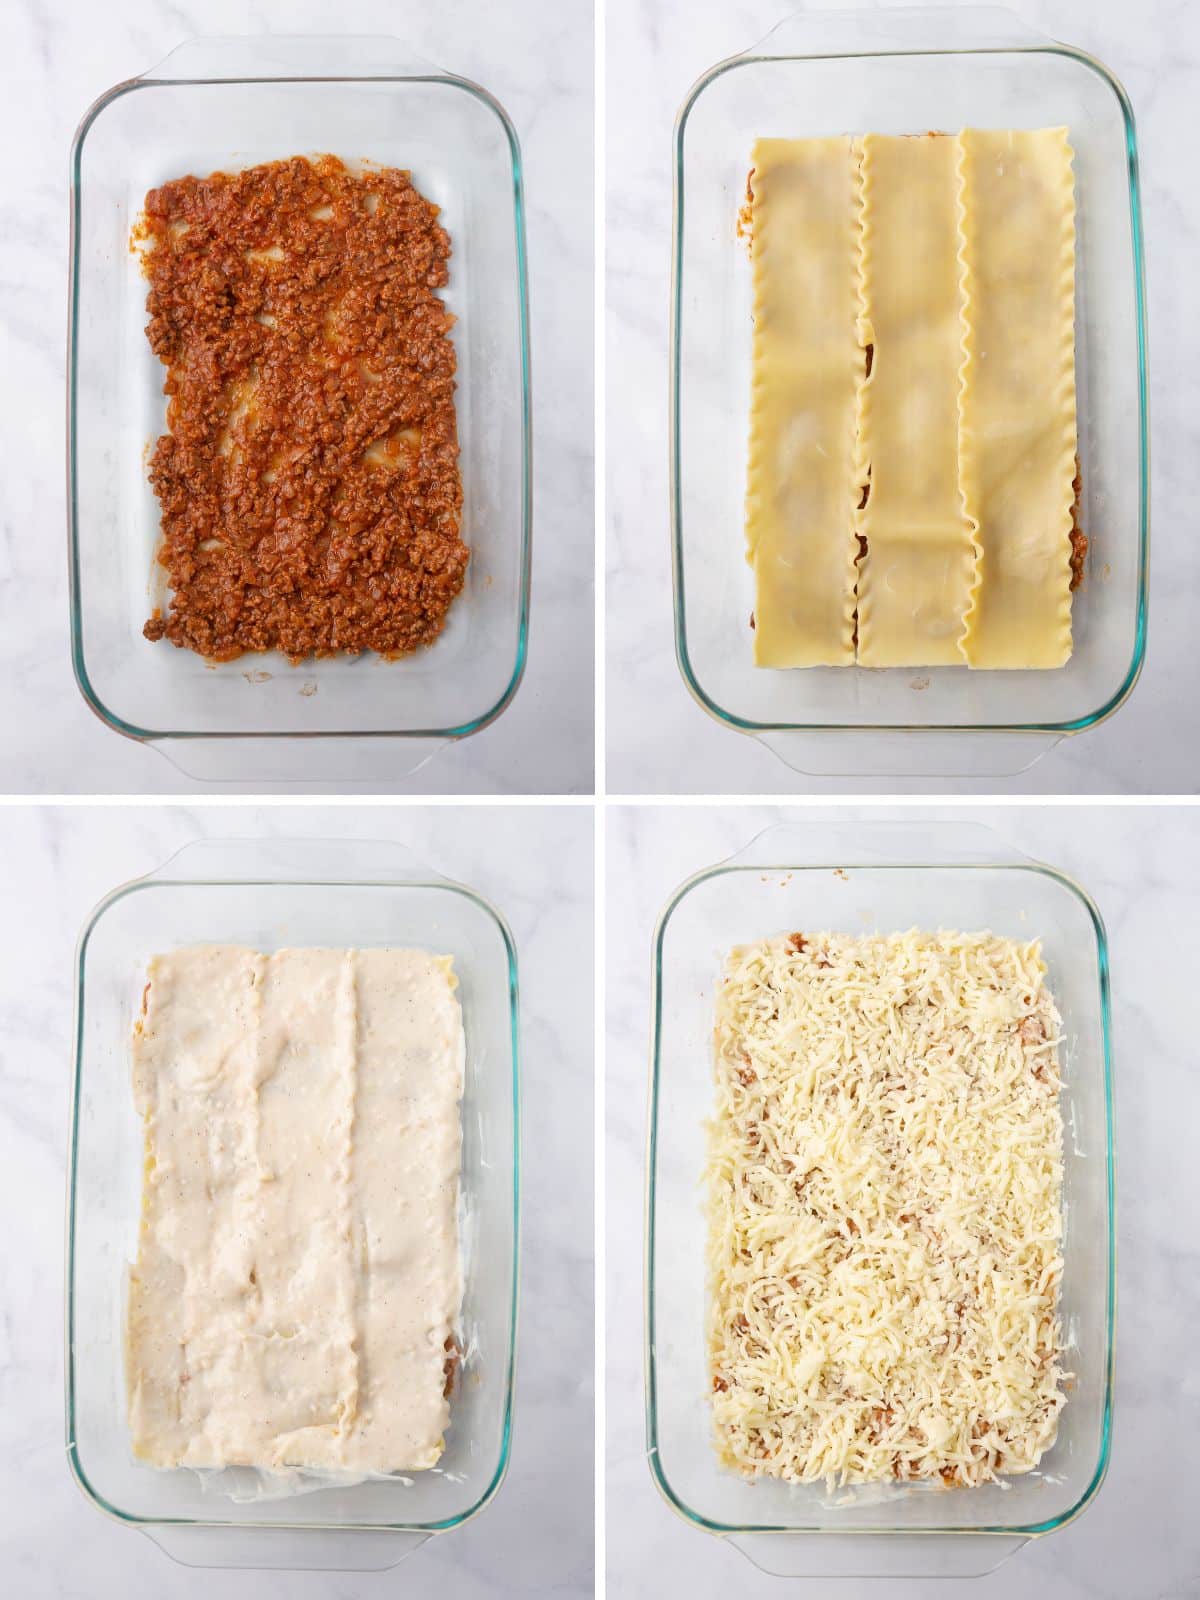 A collage of four images showing how to assemble lasagna.